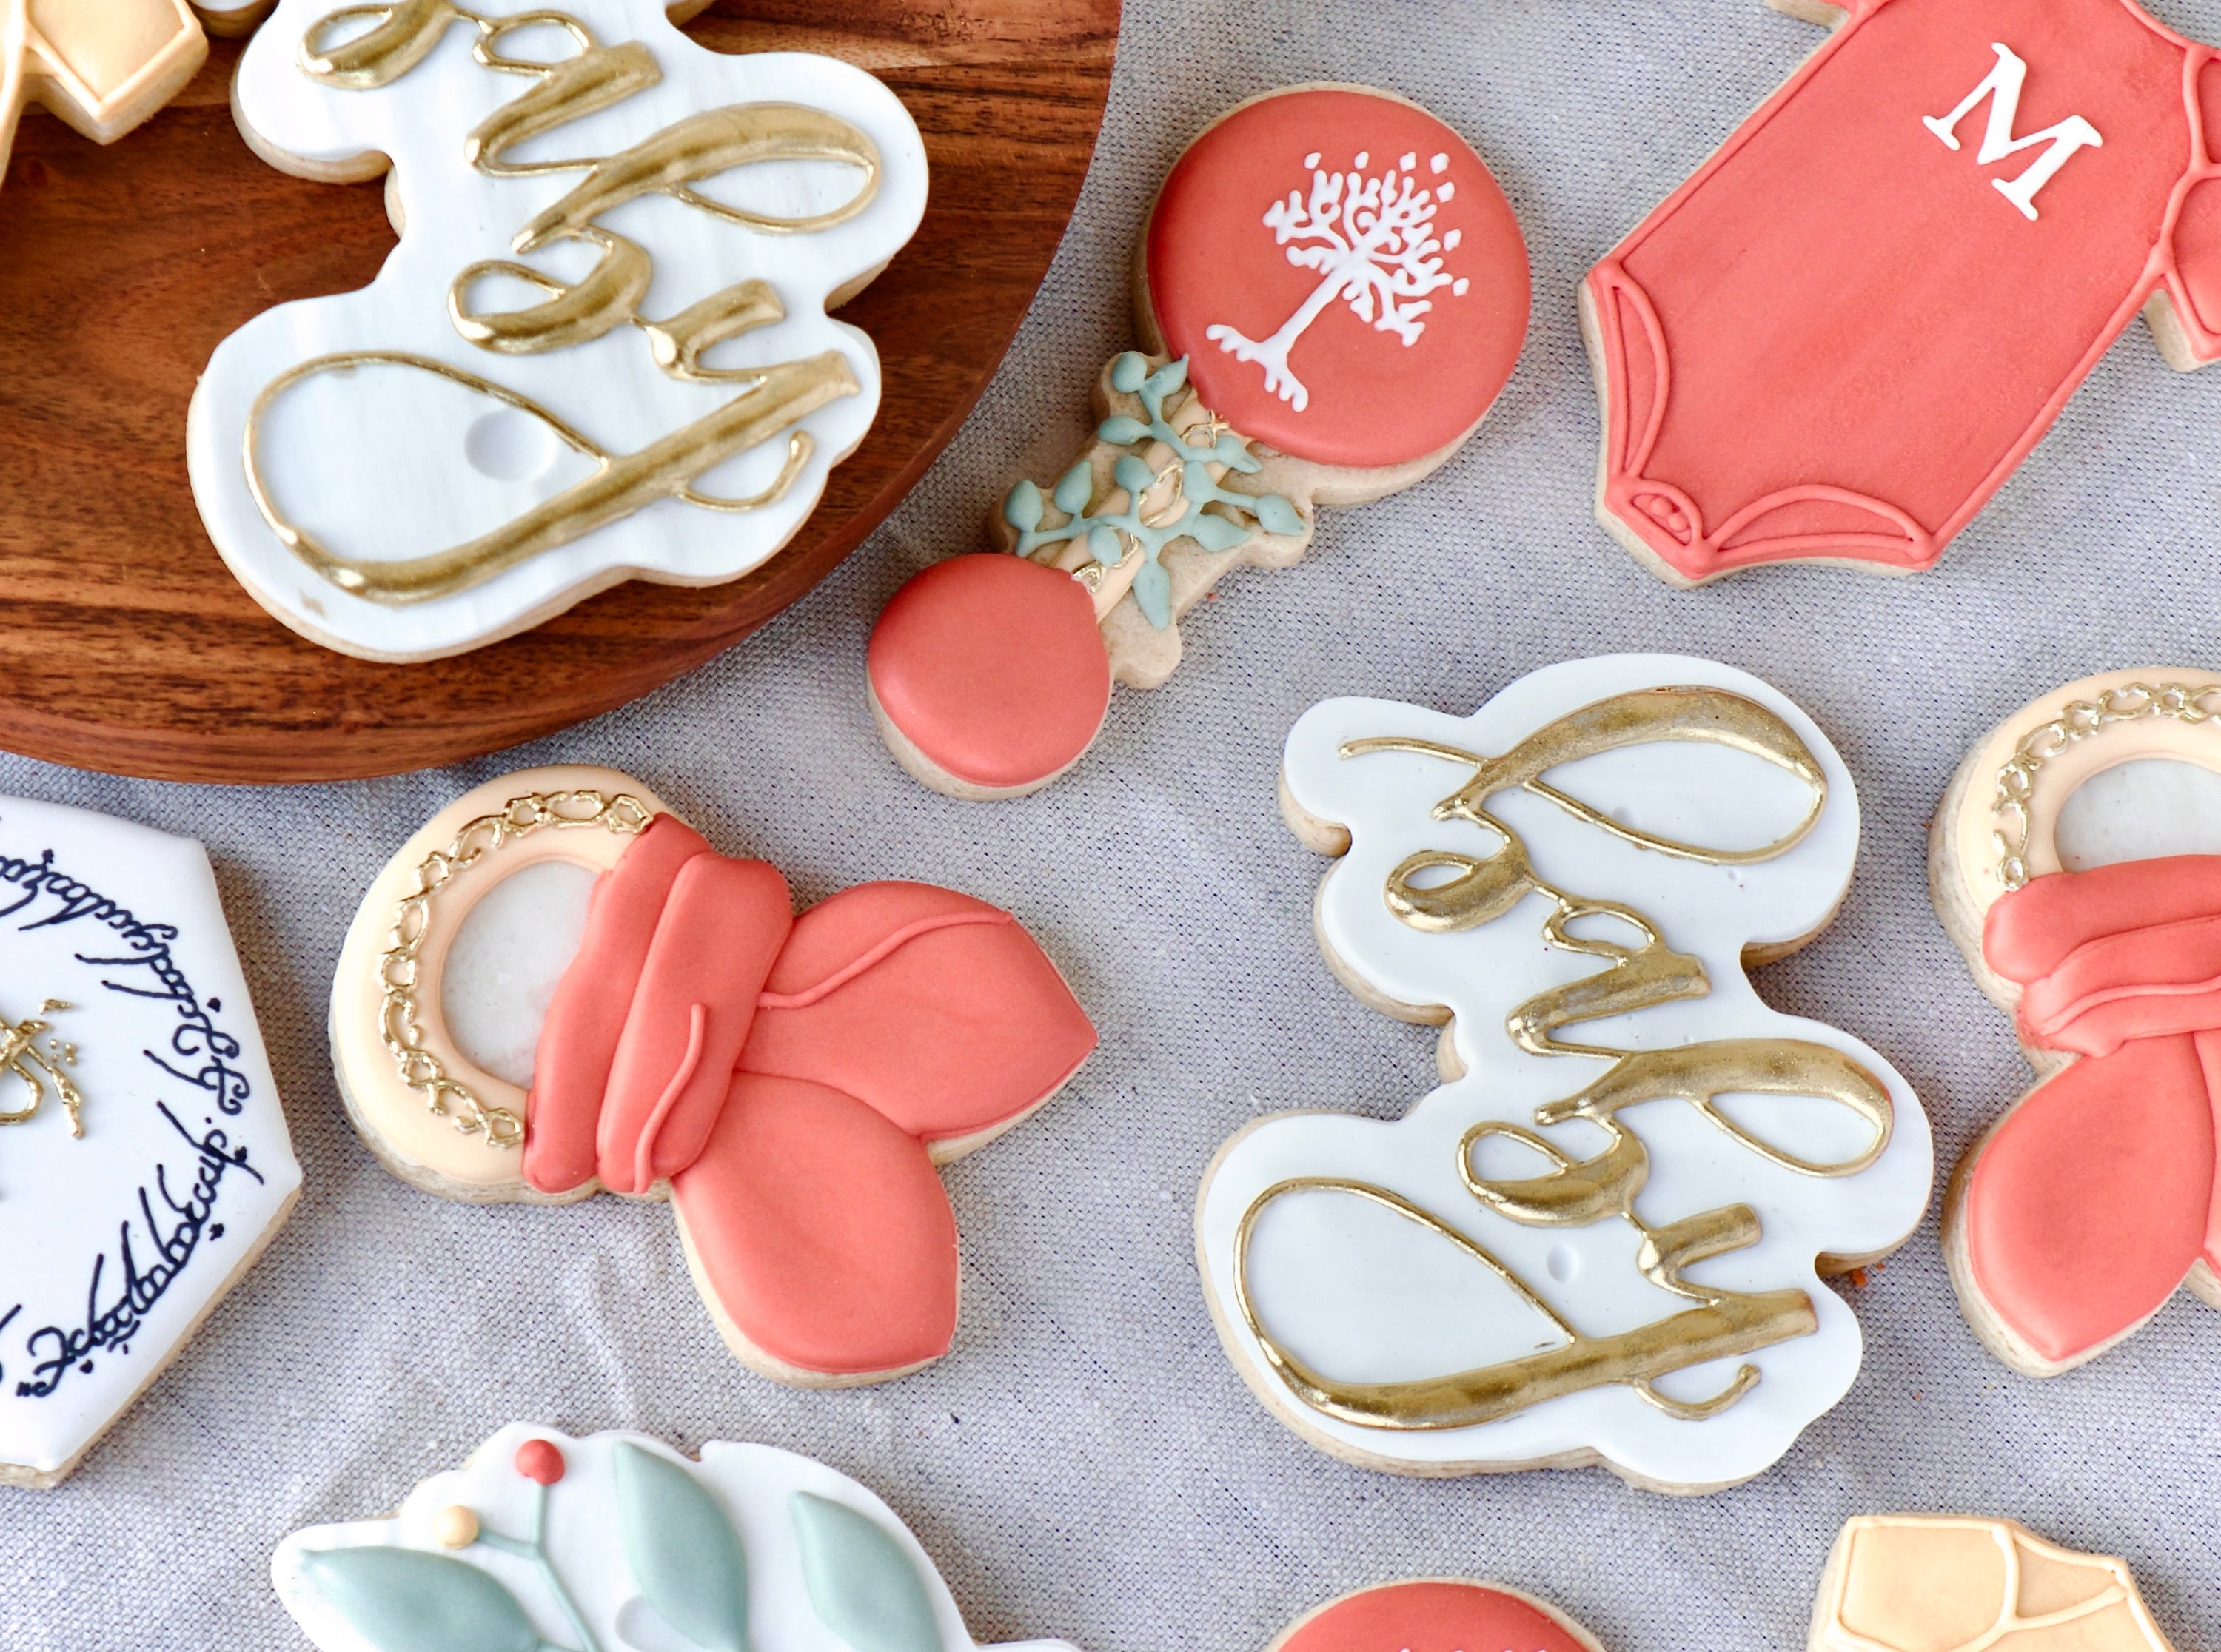 Lord of the Rings Baby Shower Sugar Cookies